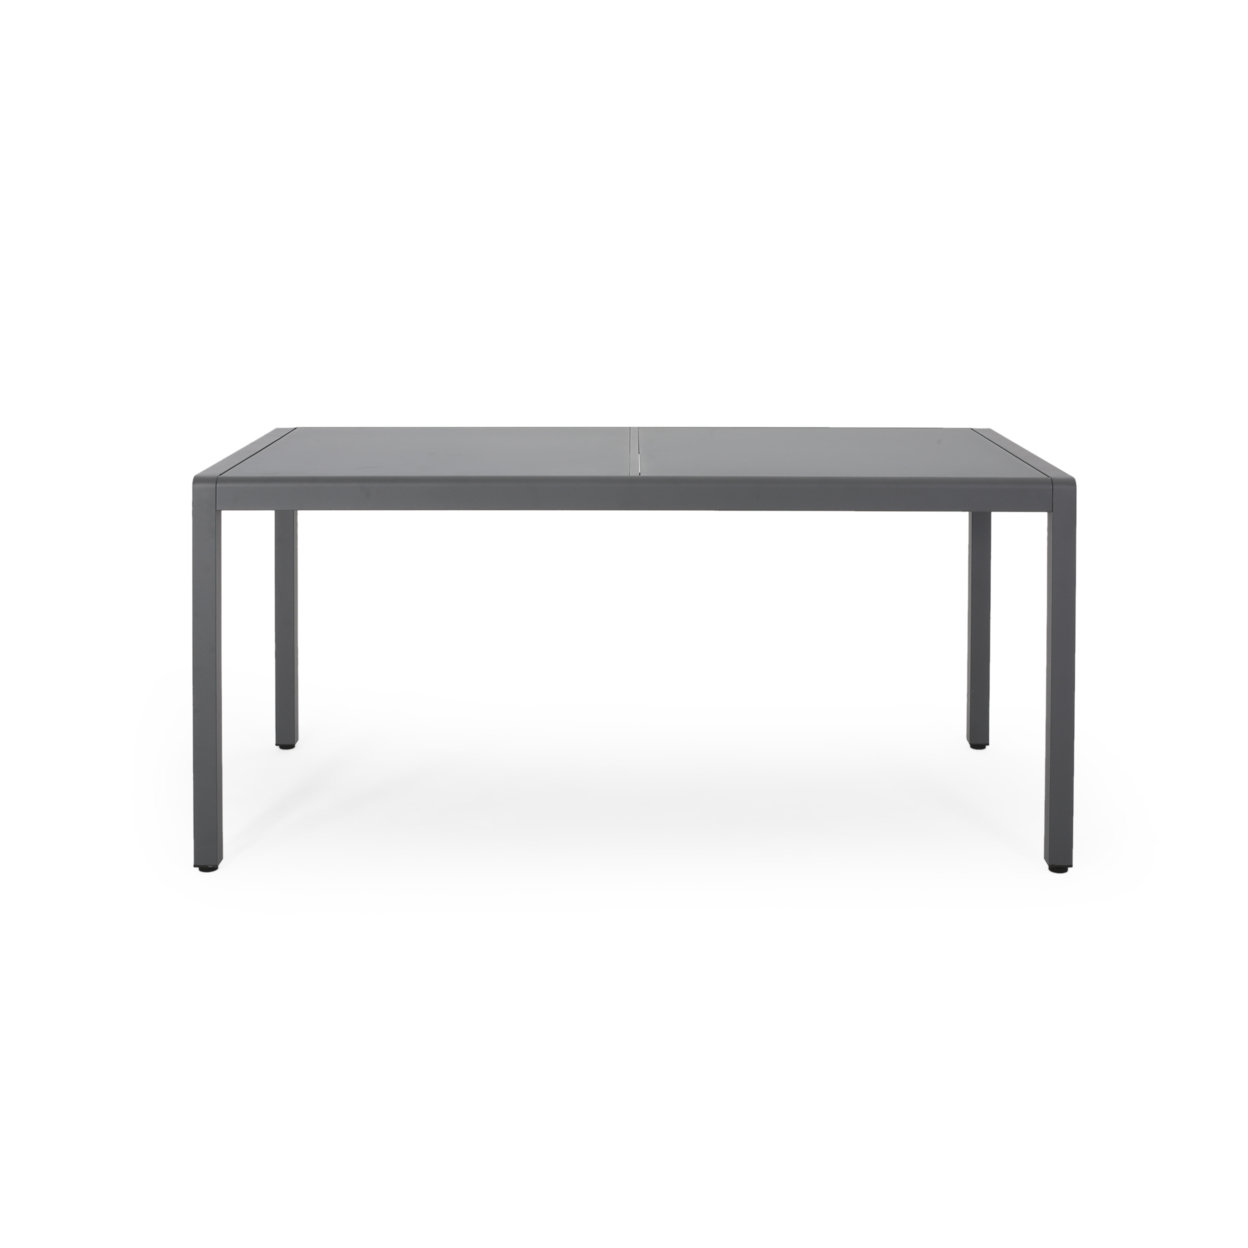 Jamie Outdoor Aluminum Dining Table With Tempered Glass Table Top - Gun Metal Gray